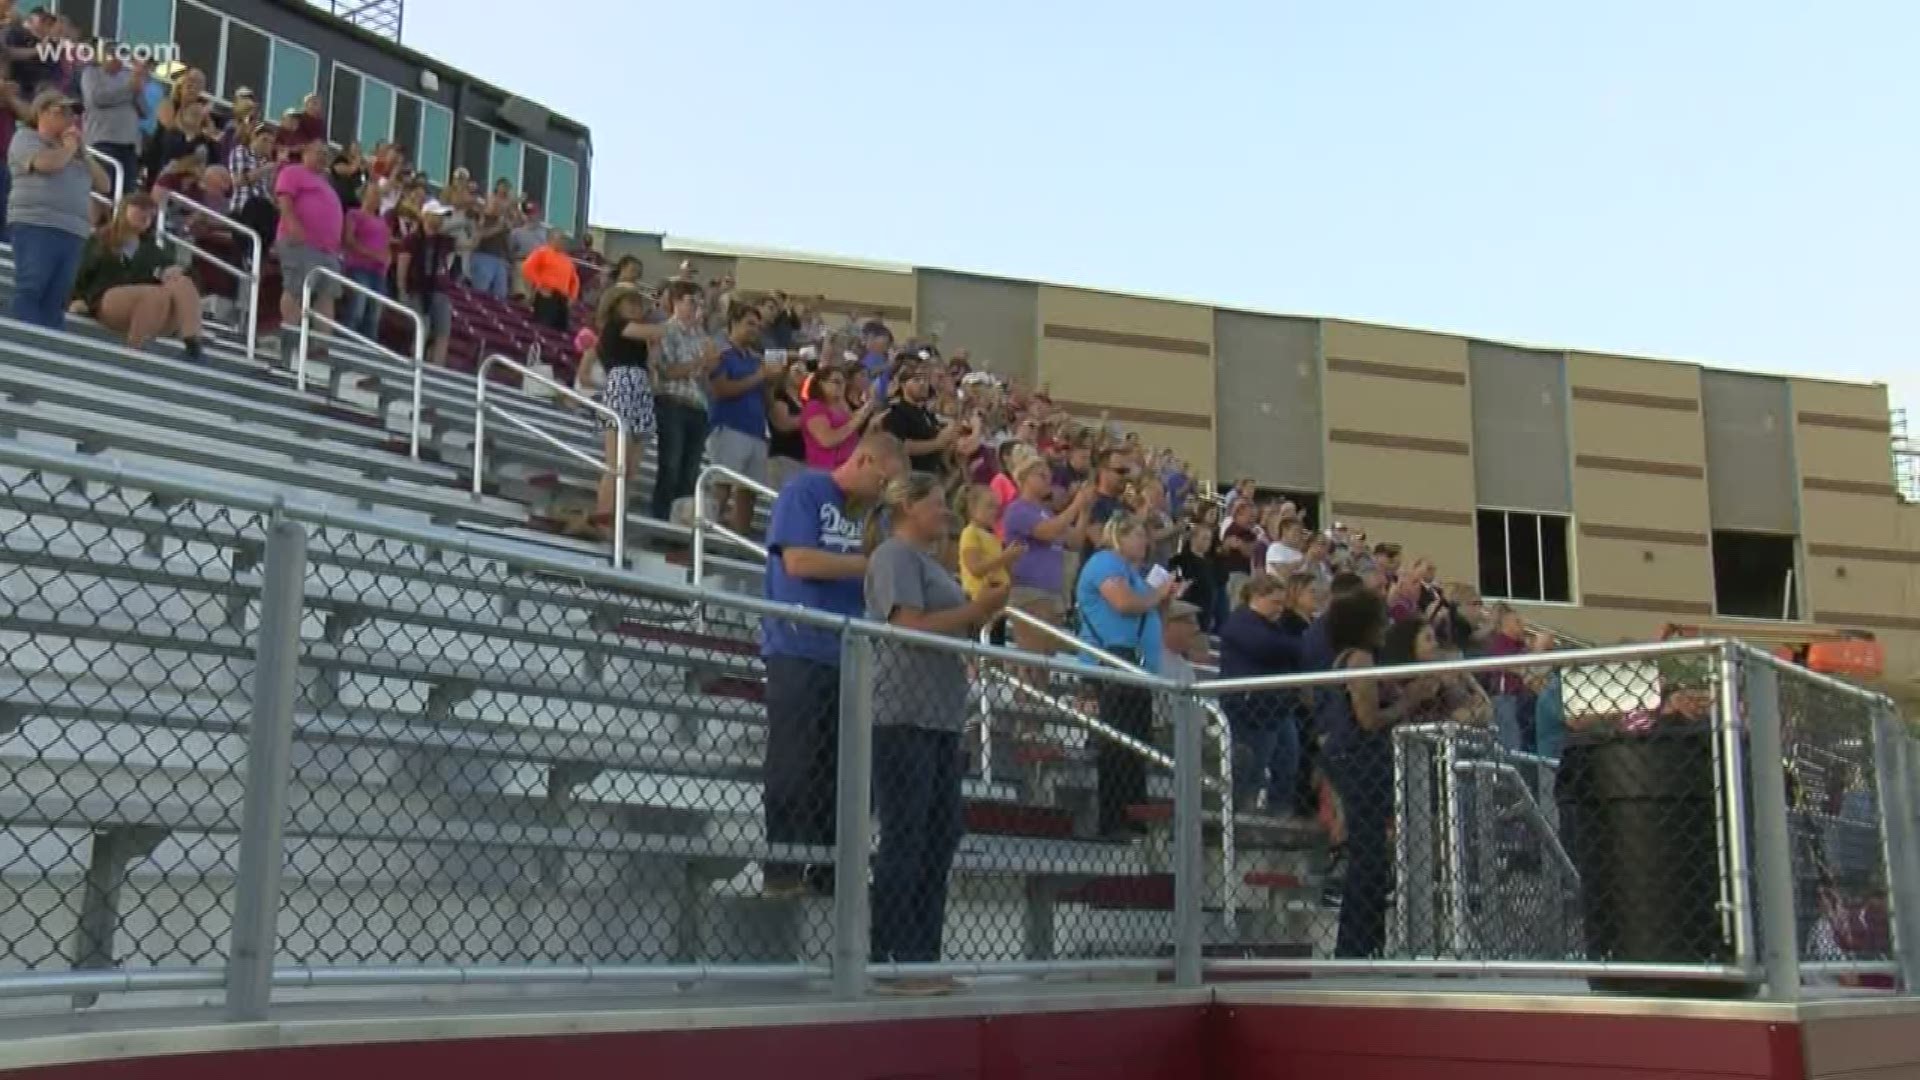 After a year of construction fans got back into Rossford's Jackson Ferguson Stadium ahead of the first Friday night under the lights.